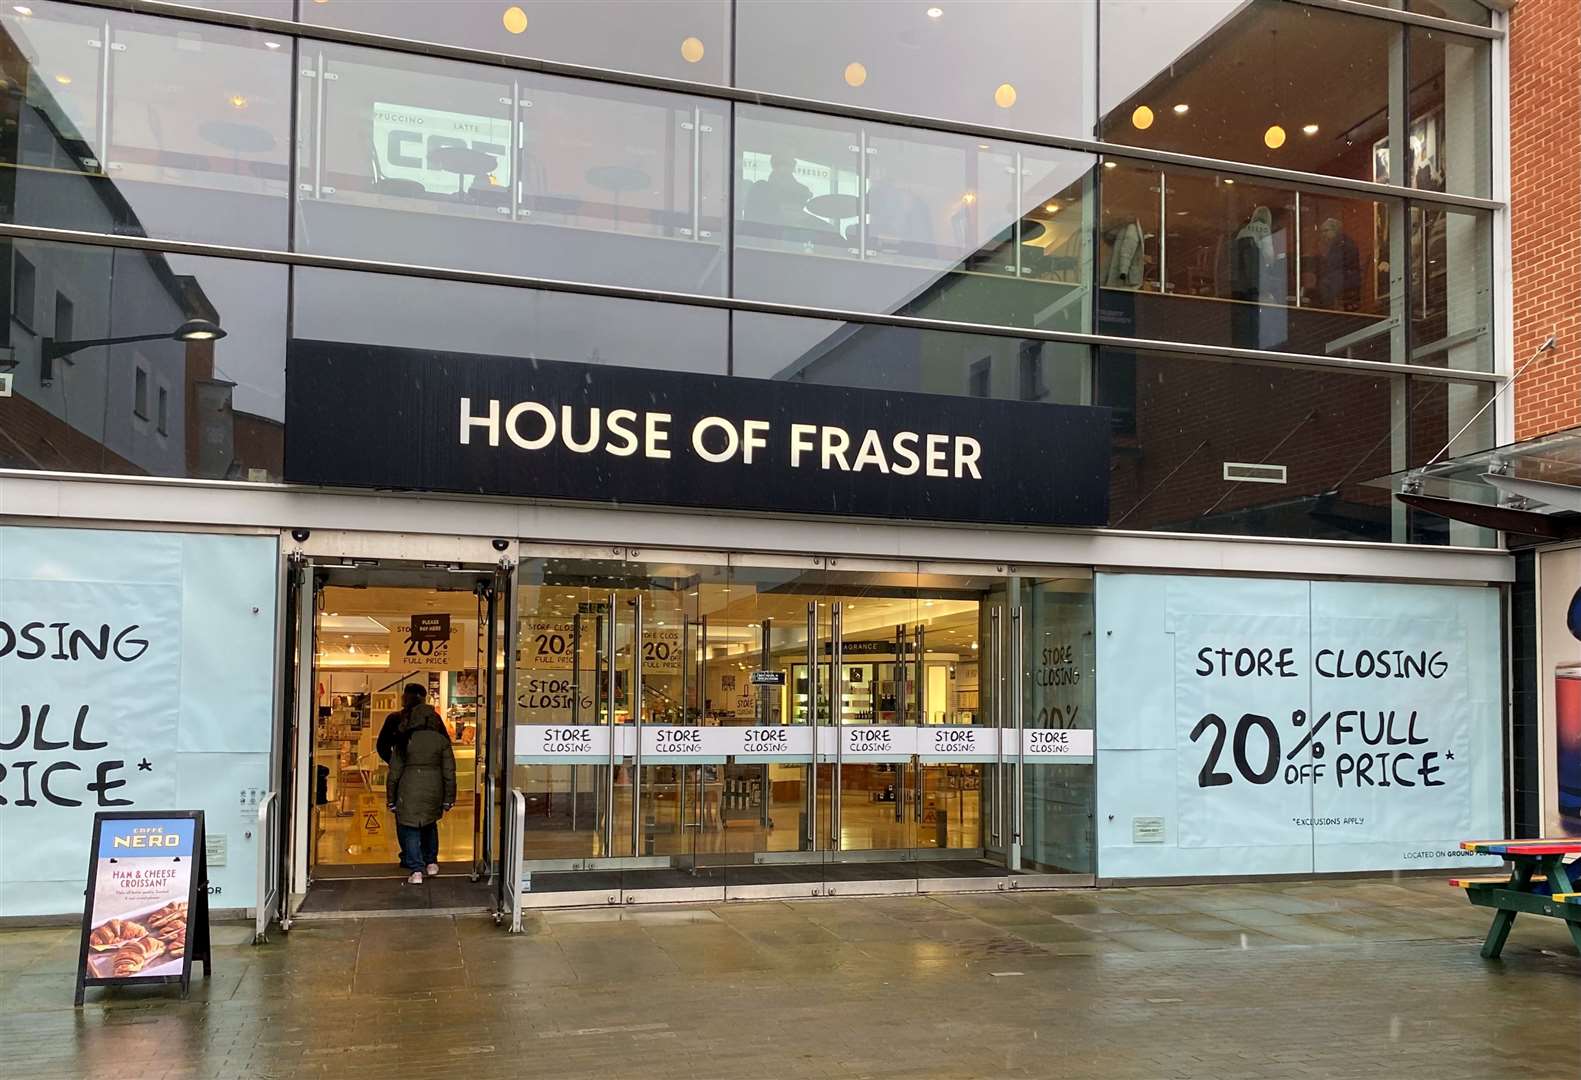 It will be moving into House of Fraser, which is having a six-month refit